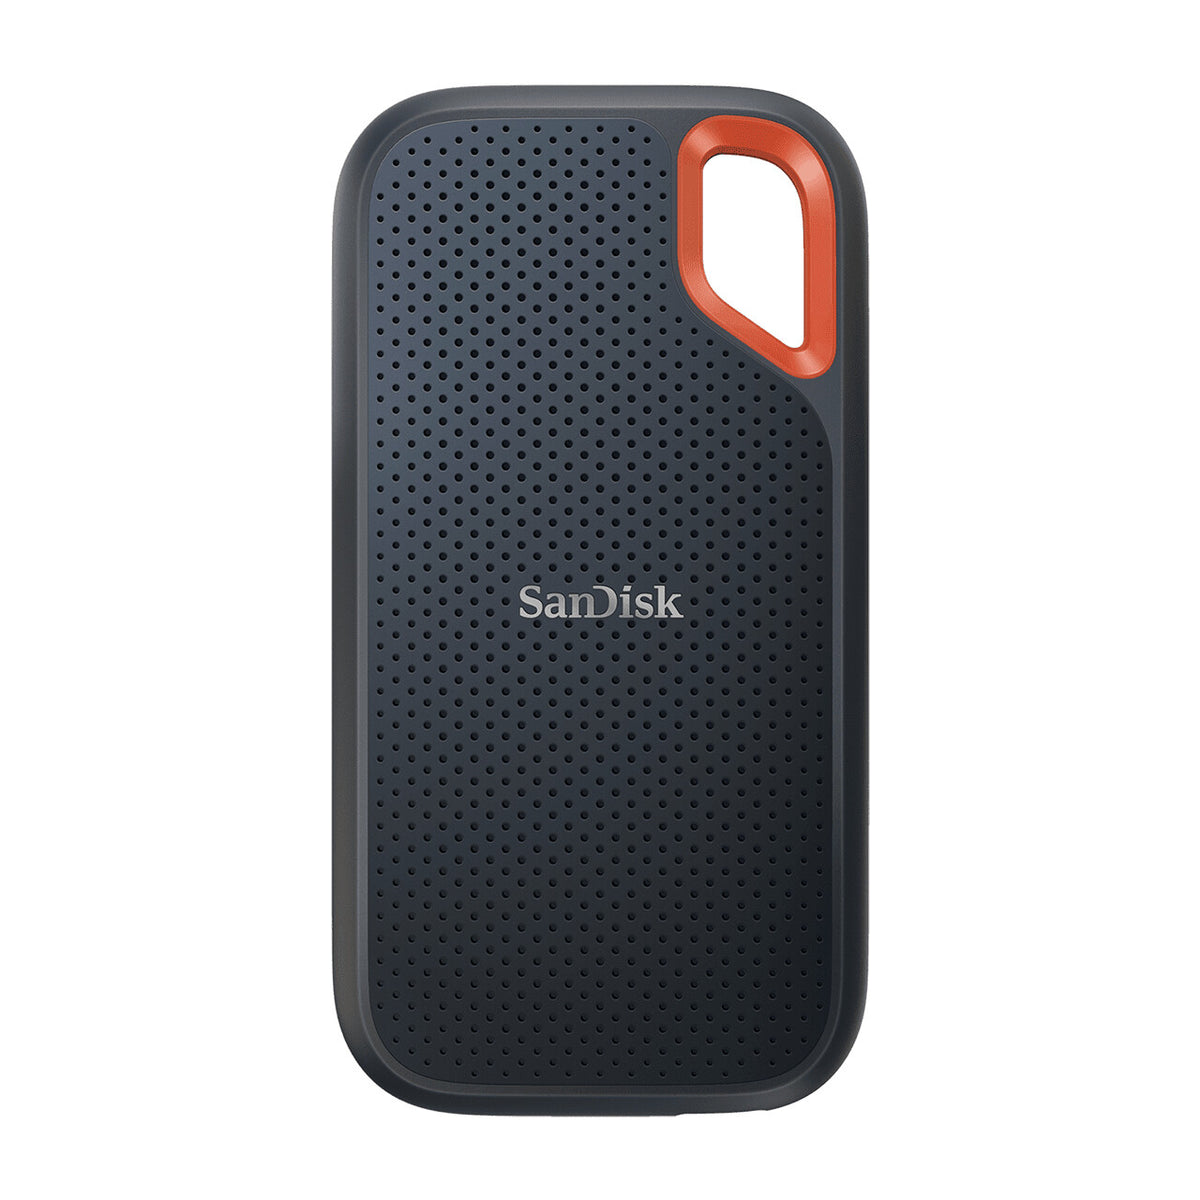 SanDisk Extreme Portable External solid state drive - 4 TB